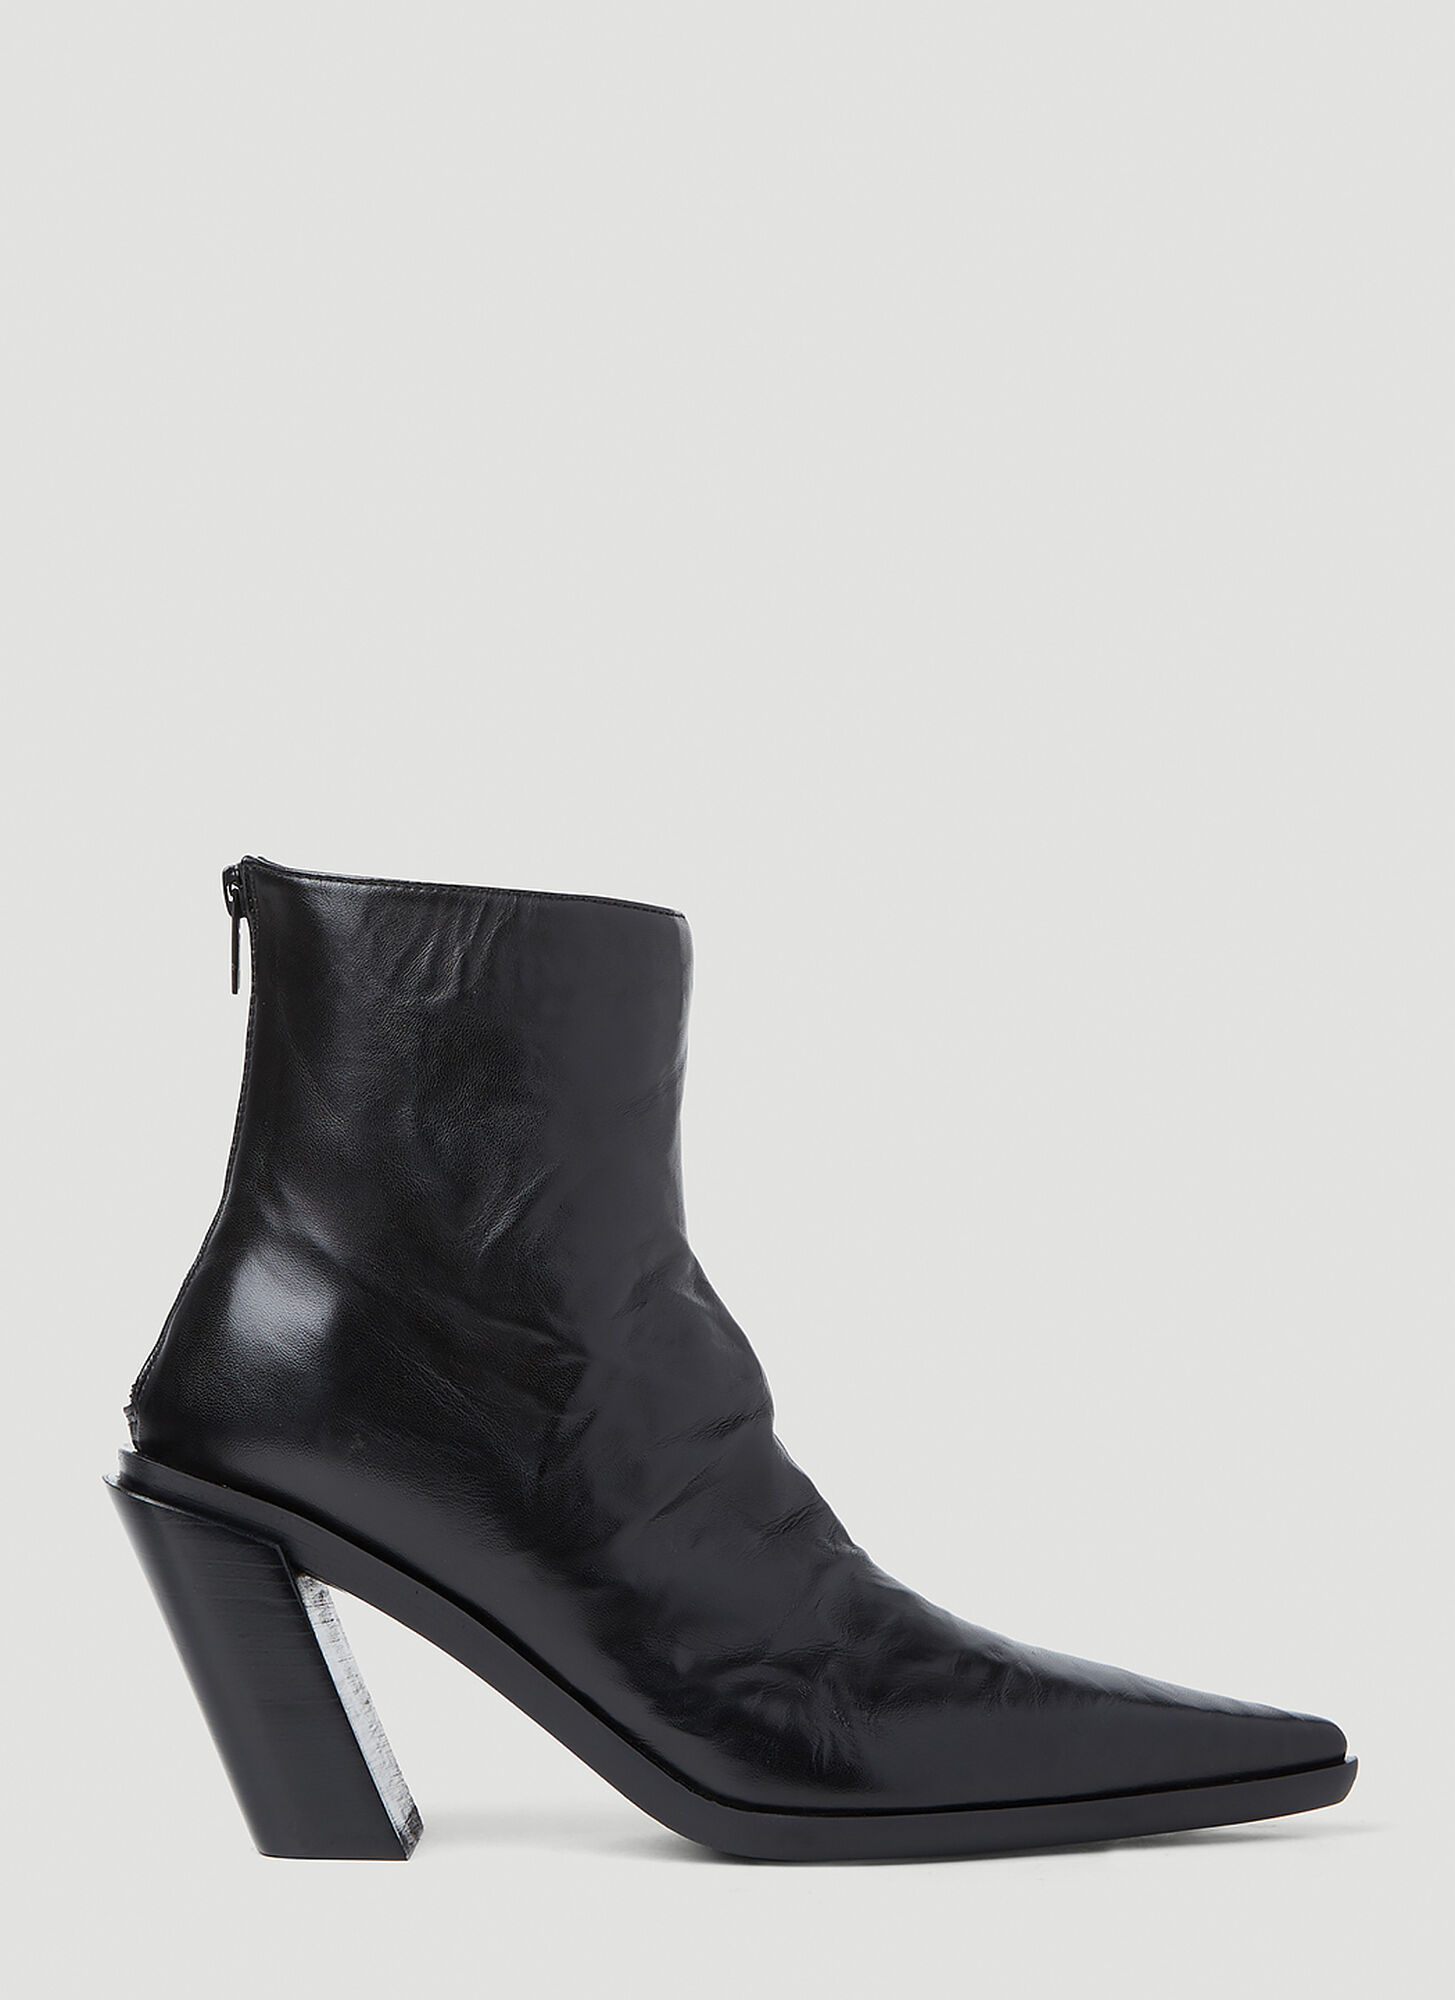 ANN DEMEULEMEESTER FLORENTINE HEELED ANKLE BOOTS